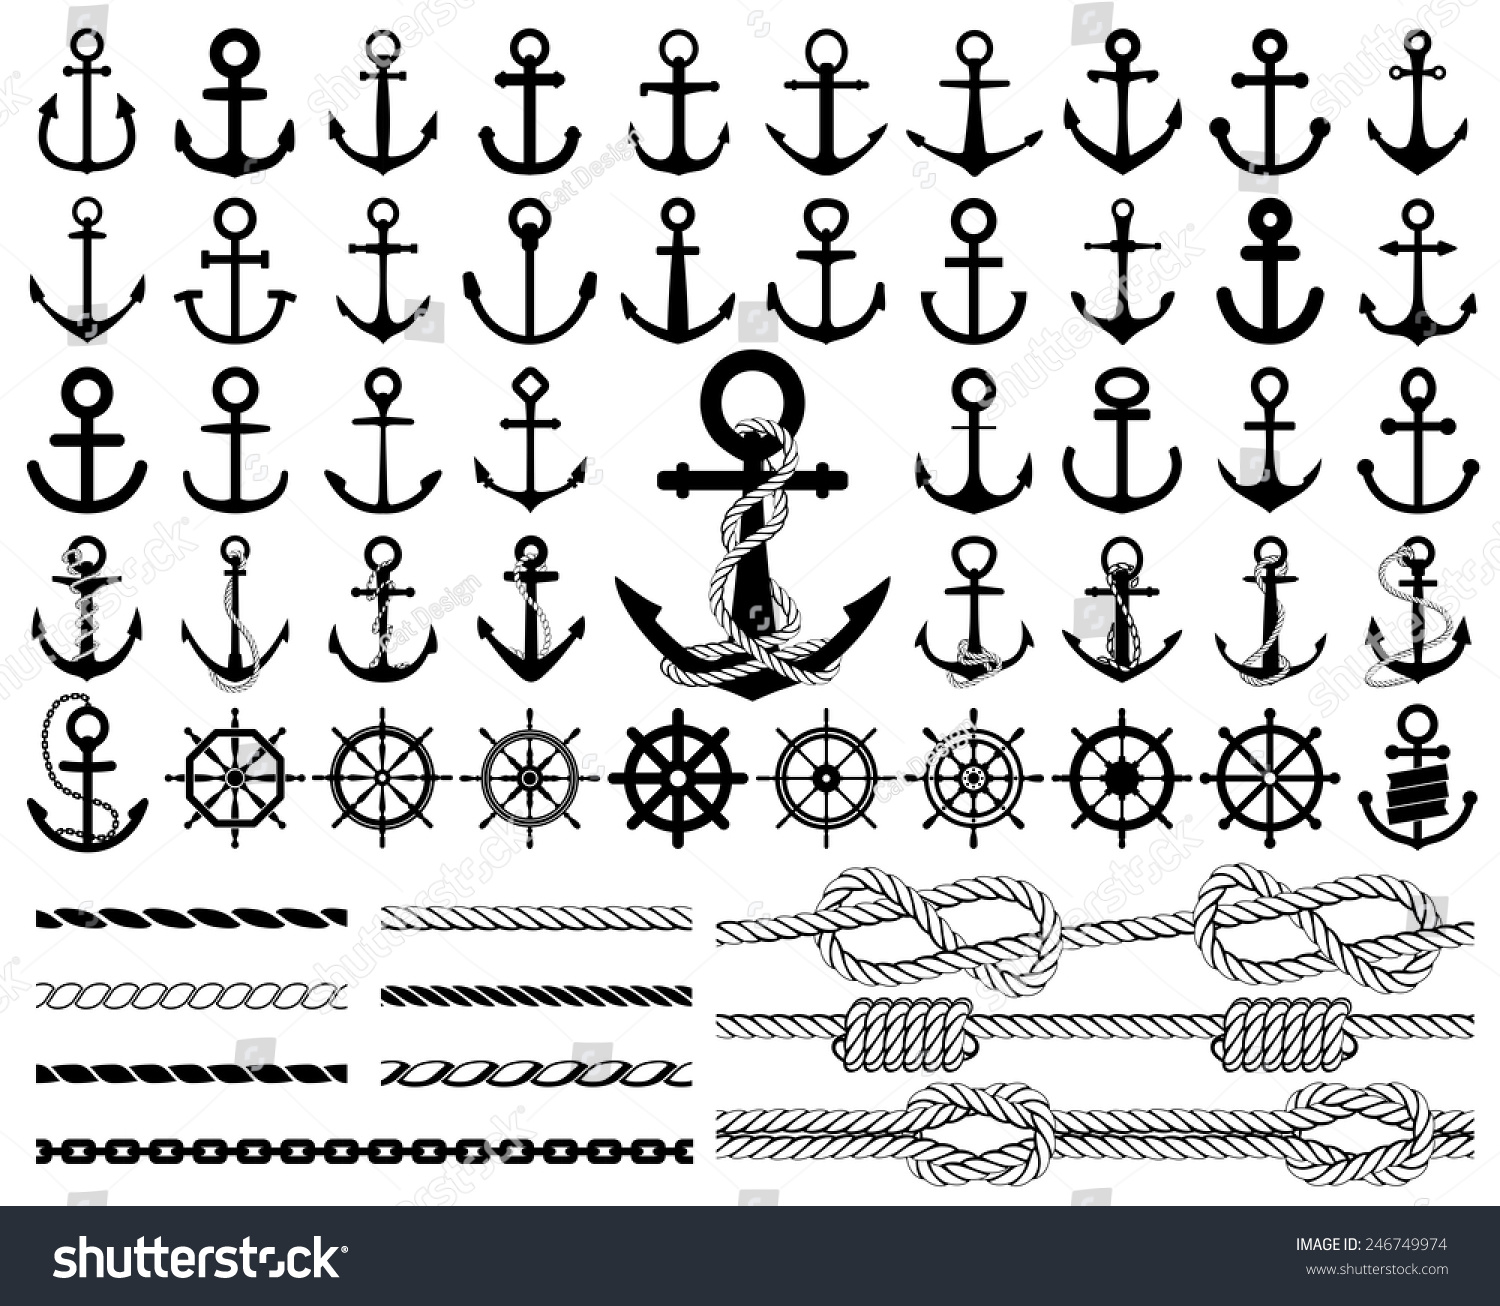 SVG of Set of anchors, rudders icons, and ropes. Vector illustration. svg